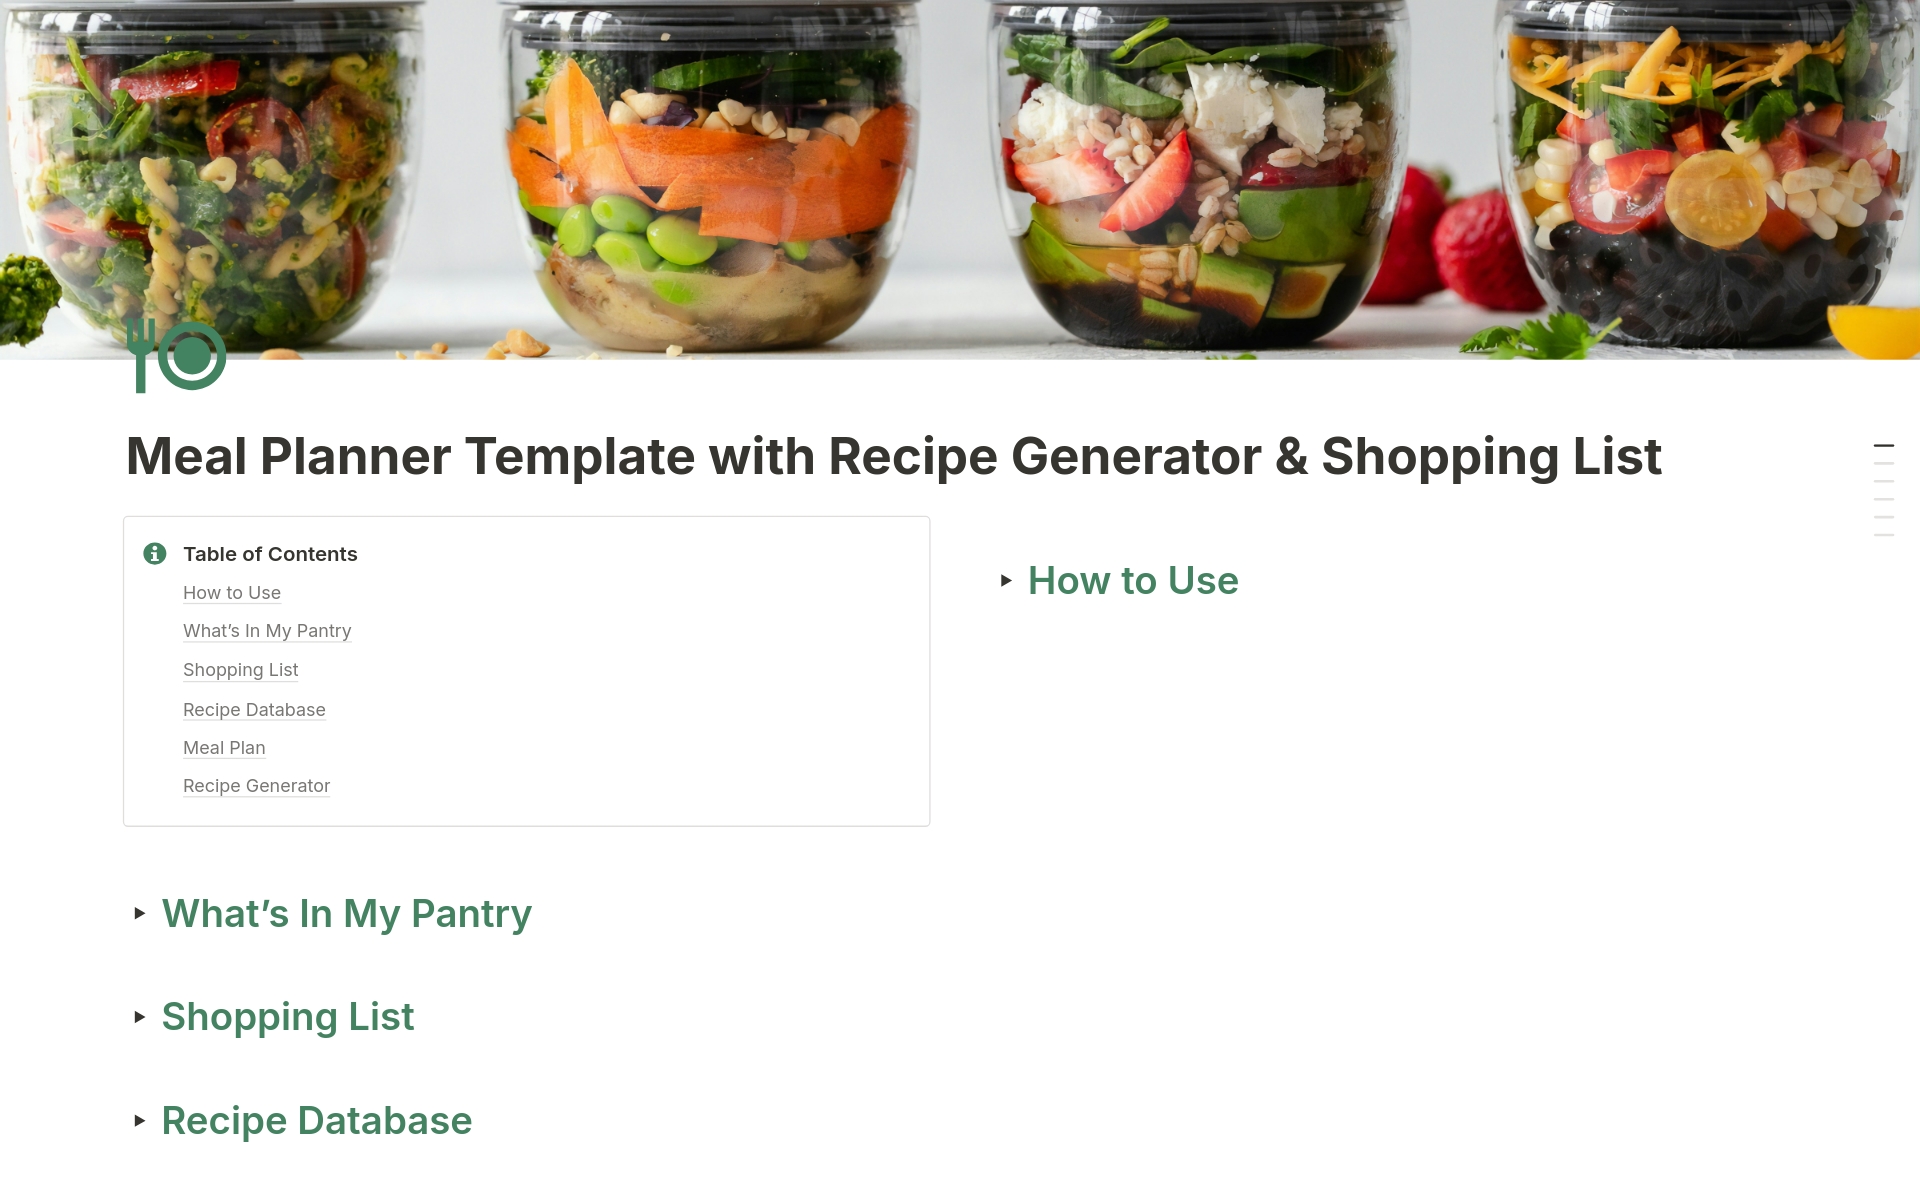 A template preview for Meal Planner with Recipe Generator & Shopping List